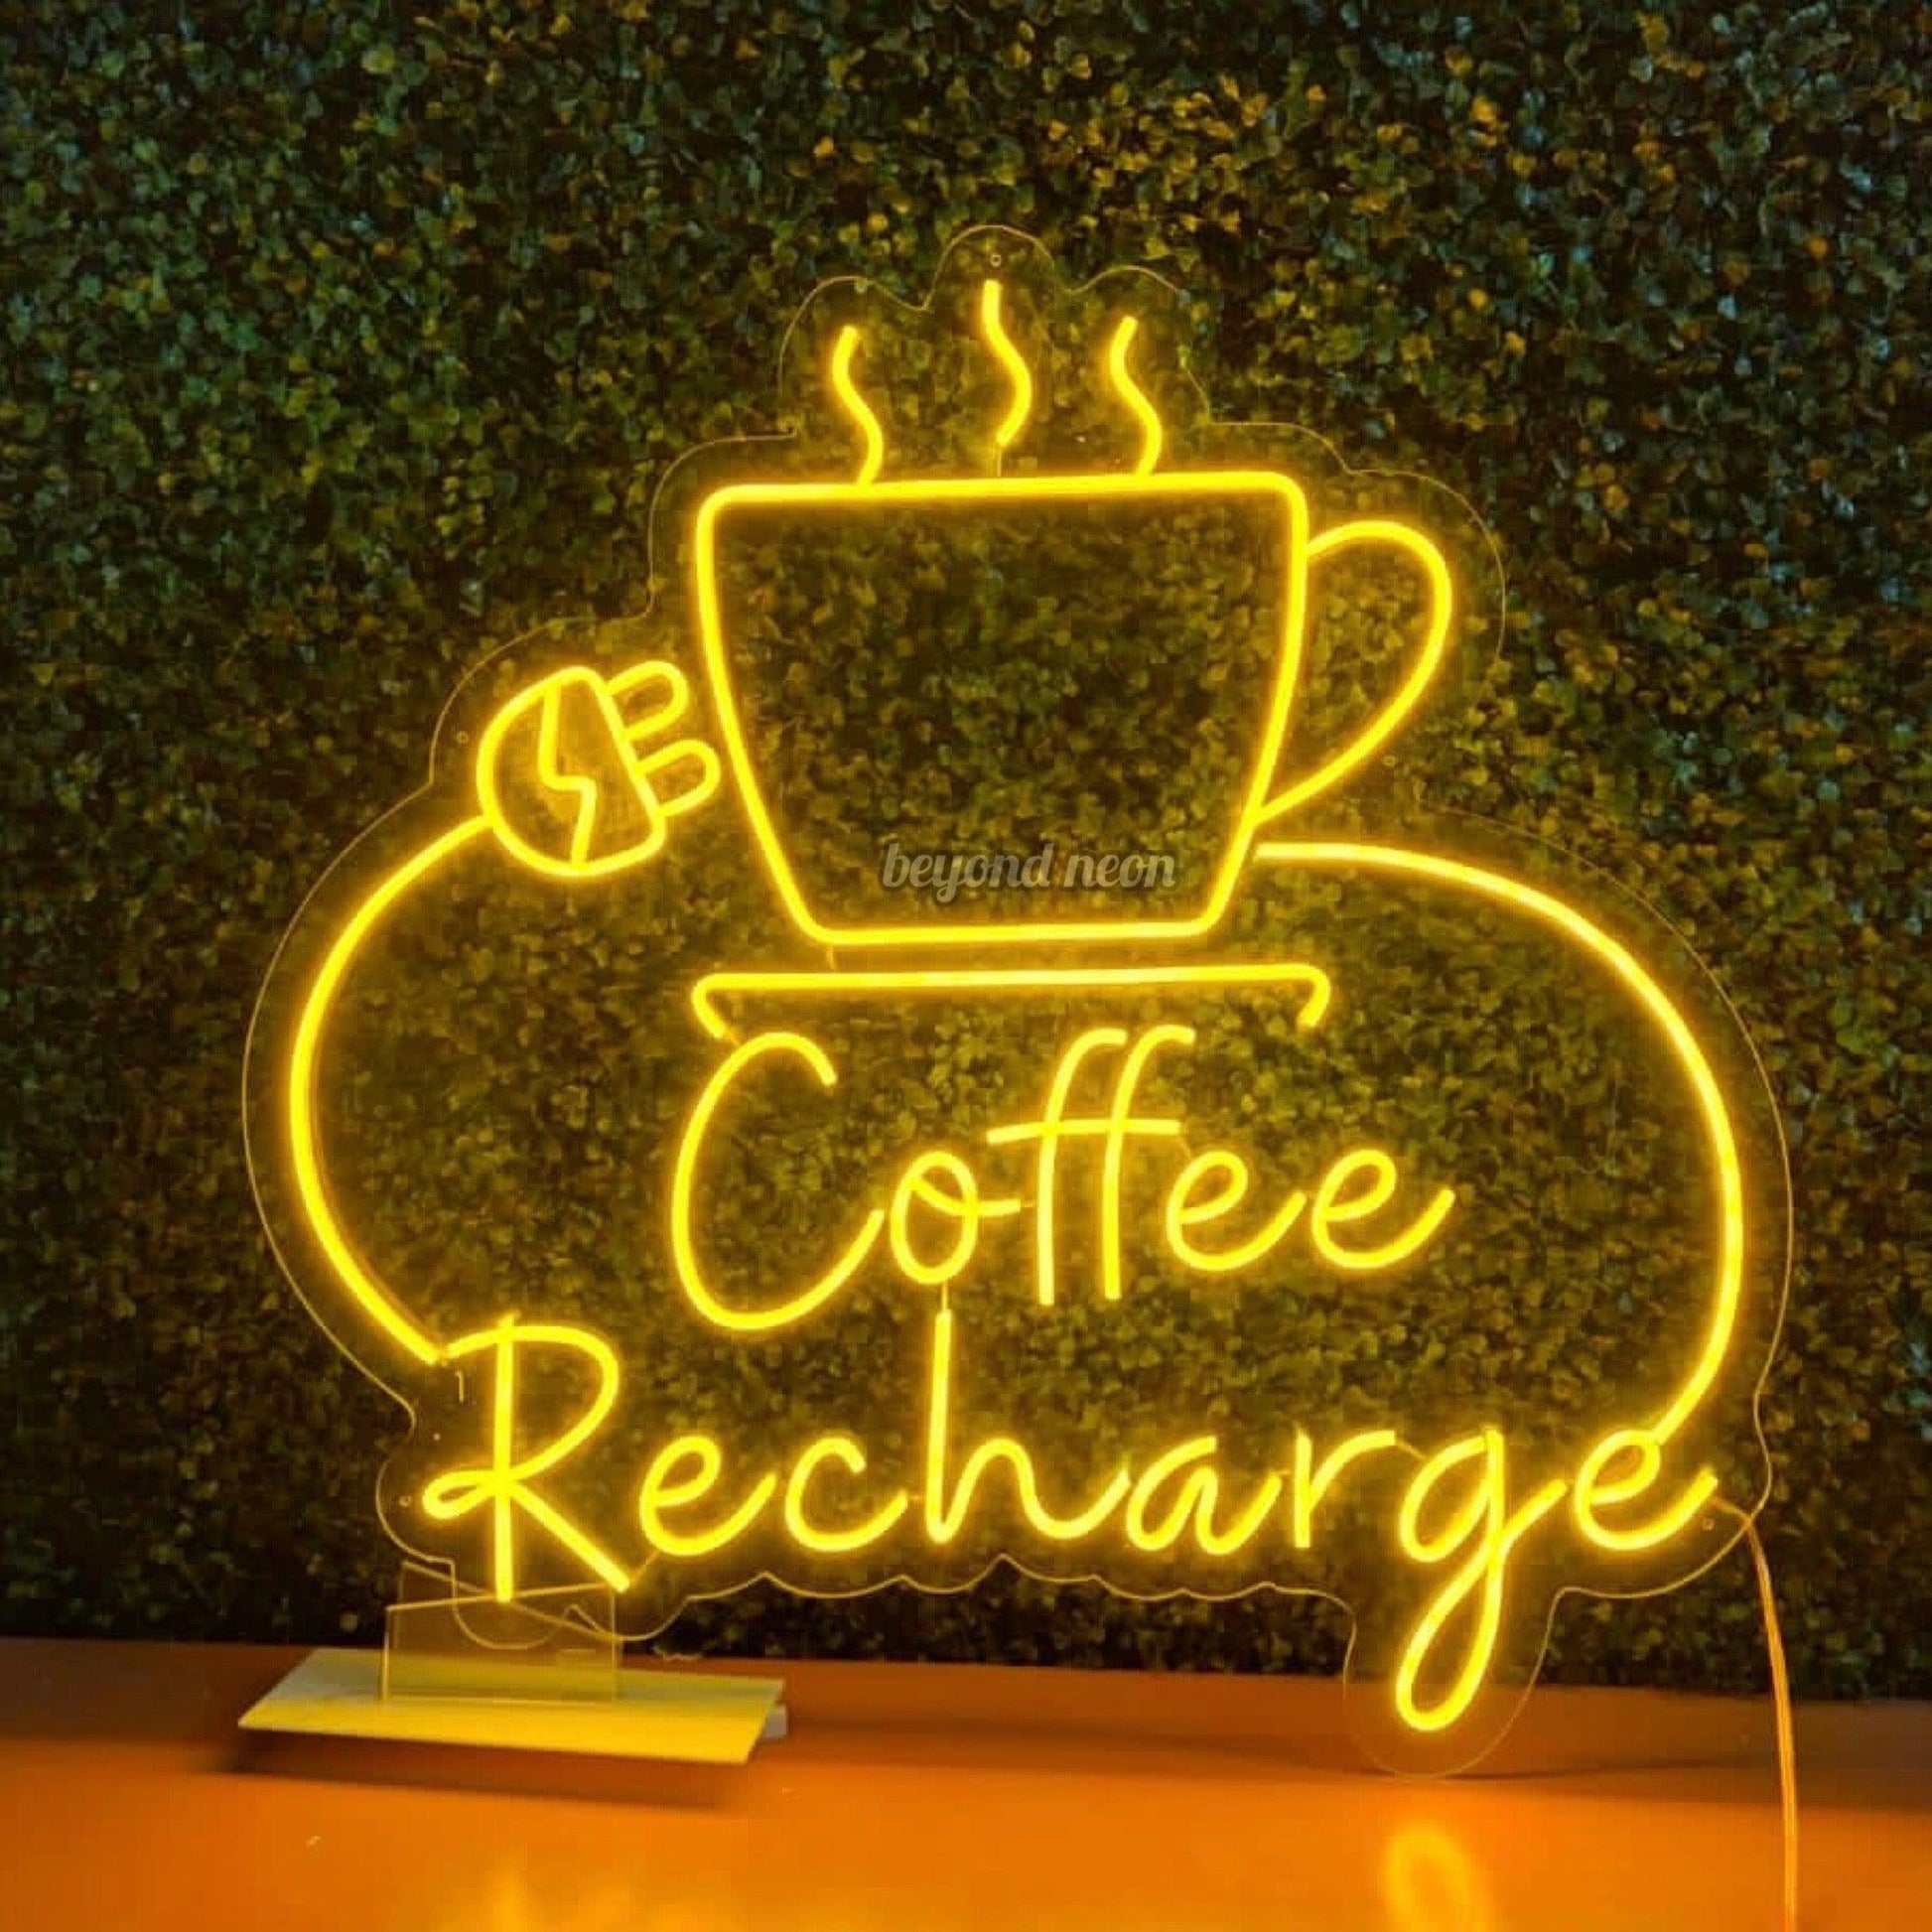 Coffee Recharge Cafe Restaurant Neon Sign – beyond neon